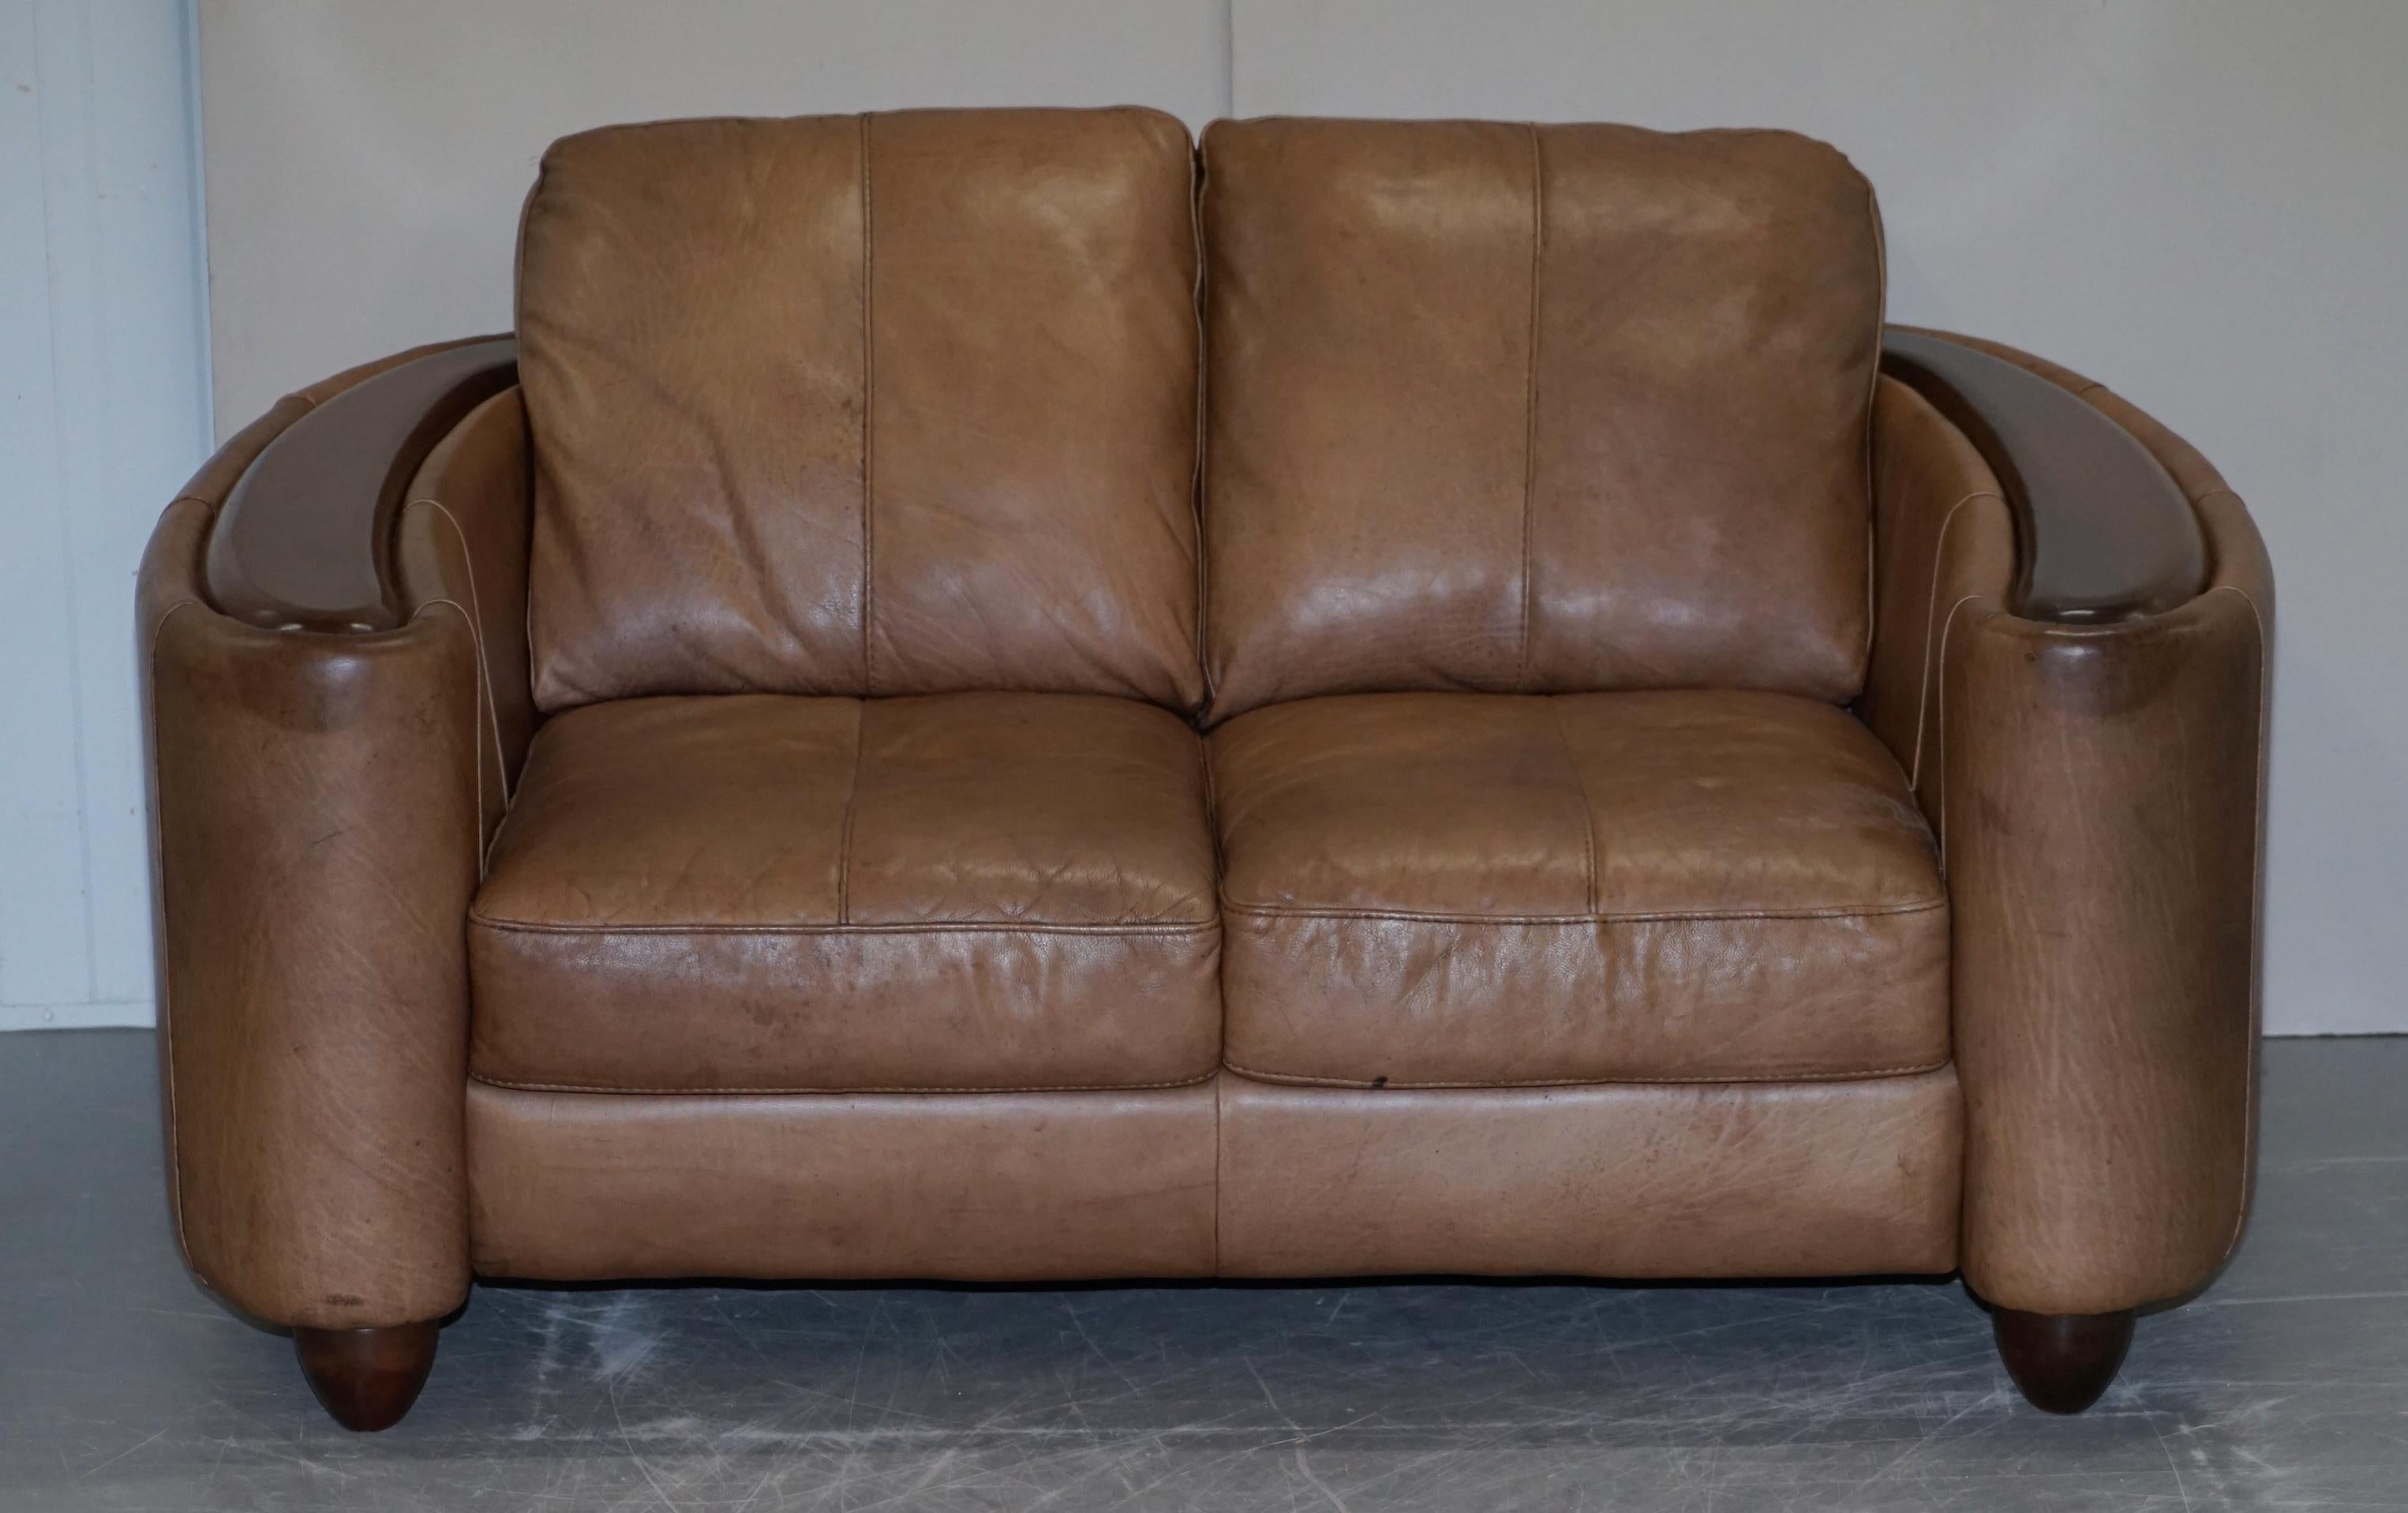 We are delighted to offer for sale this lovely vintage Art Deco style aged brown leather club sofa with polished mahogany arms

This is very stylish, exceptionally comfortable and well made, the leather is fully aniline which is upholstered plain